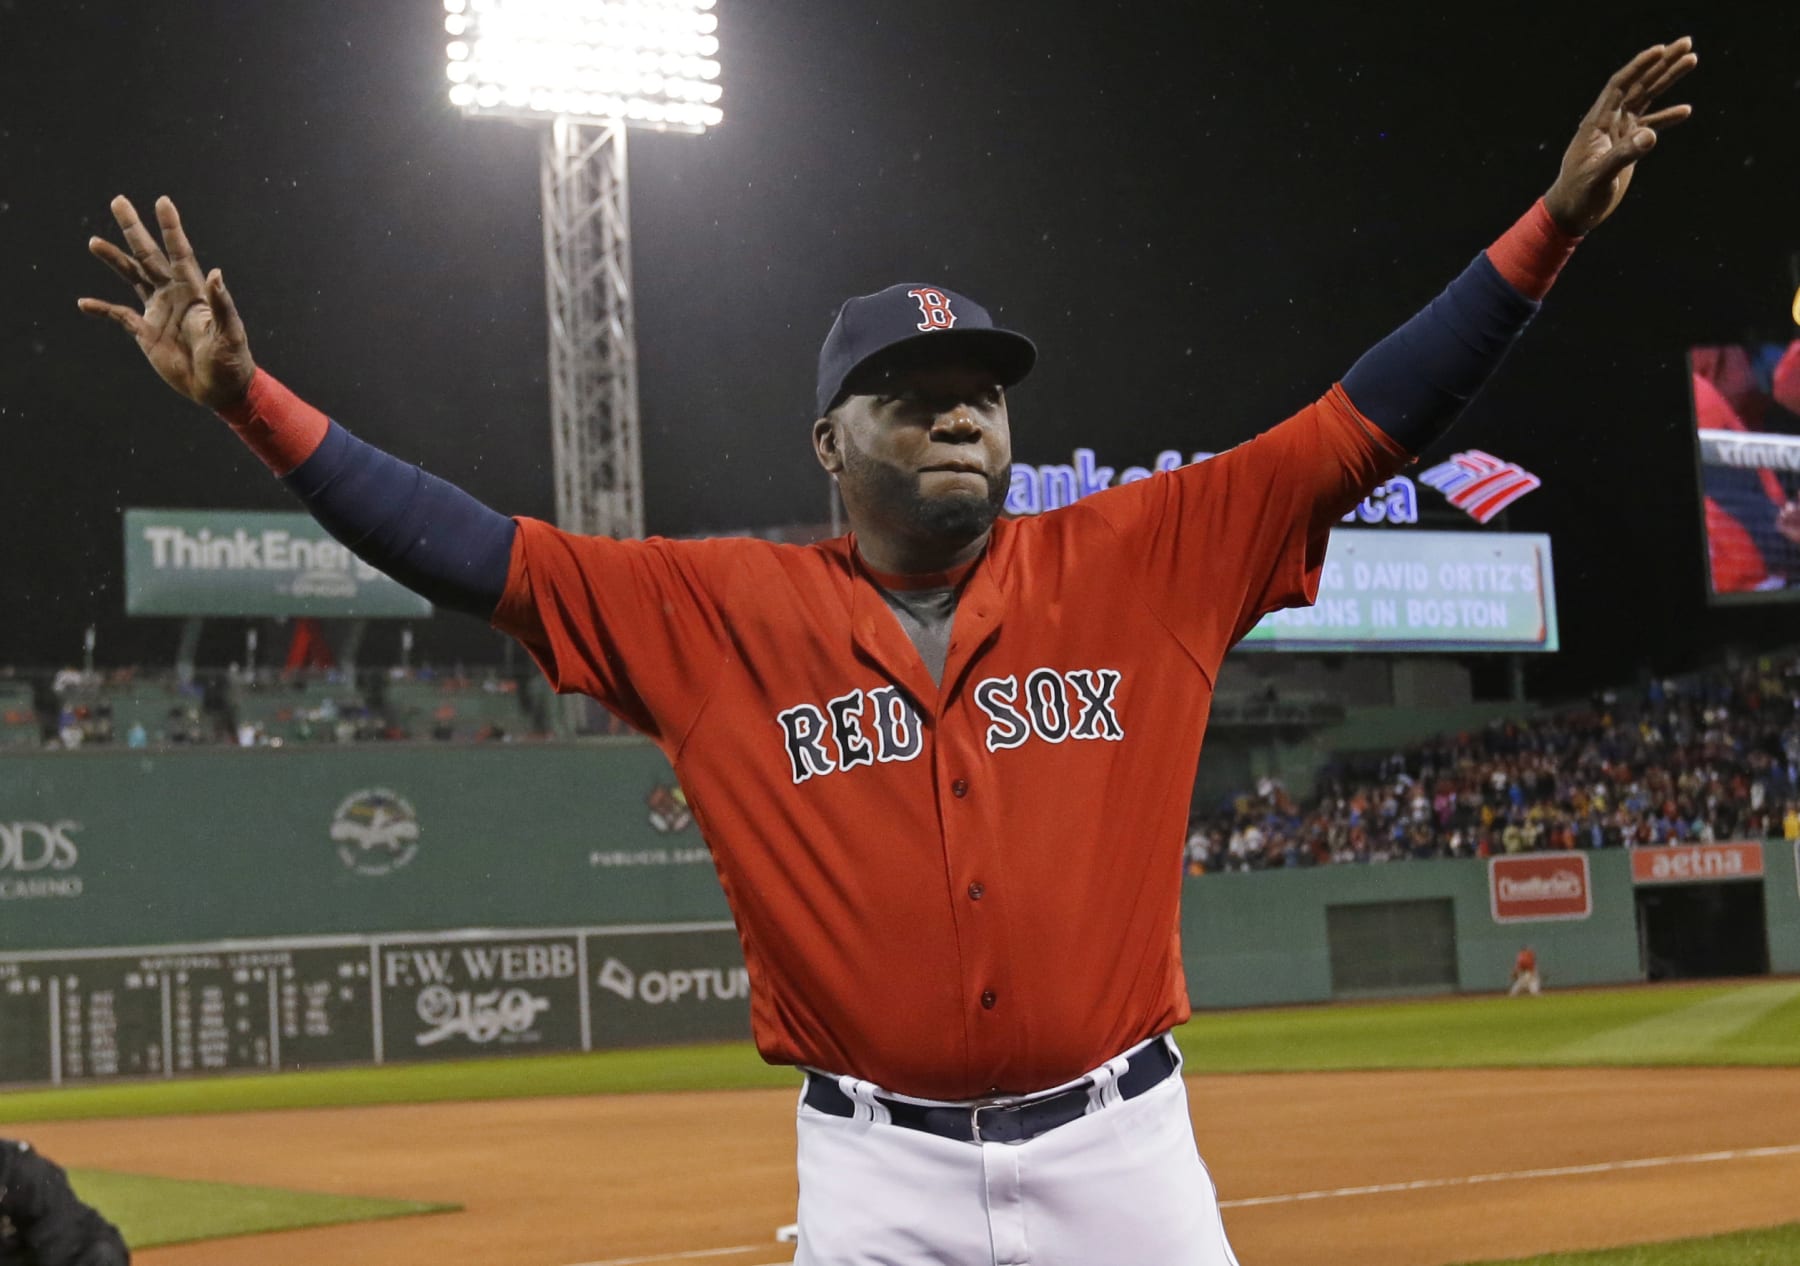 David Ortiz Brags About Sweeping Yanks, Compares It to Meeting God